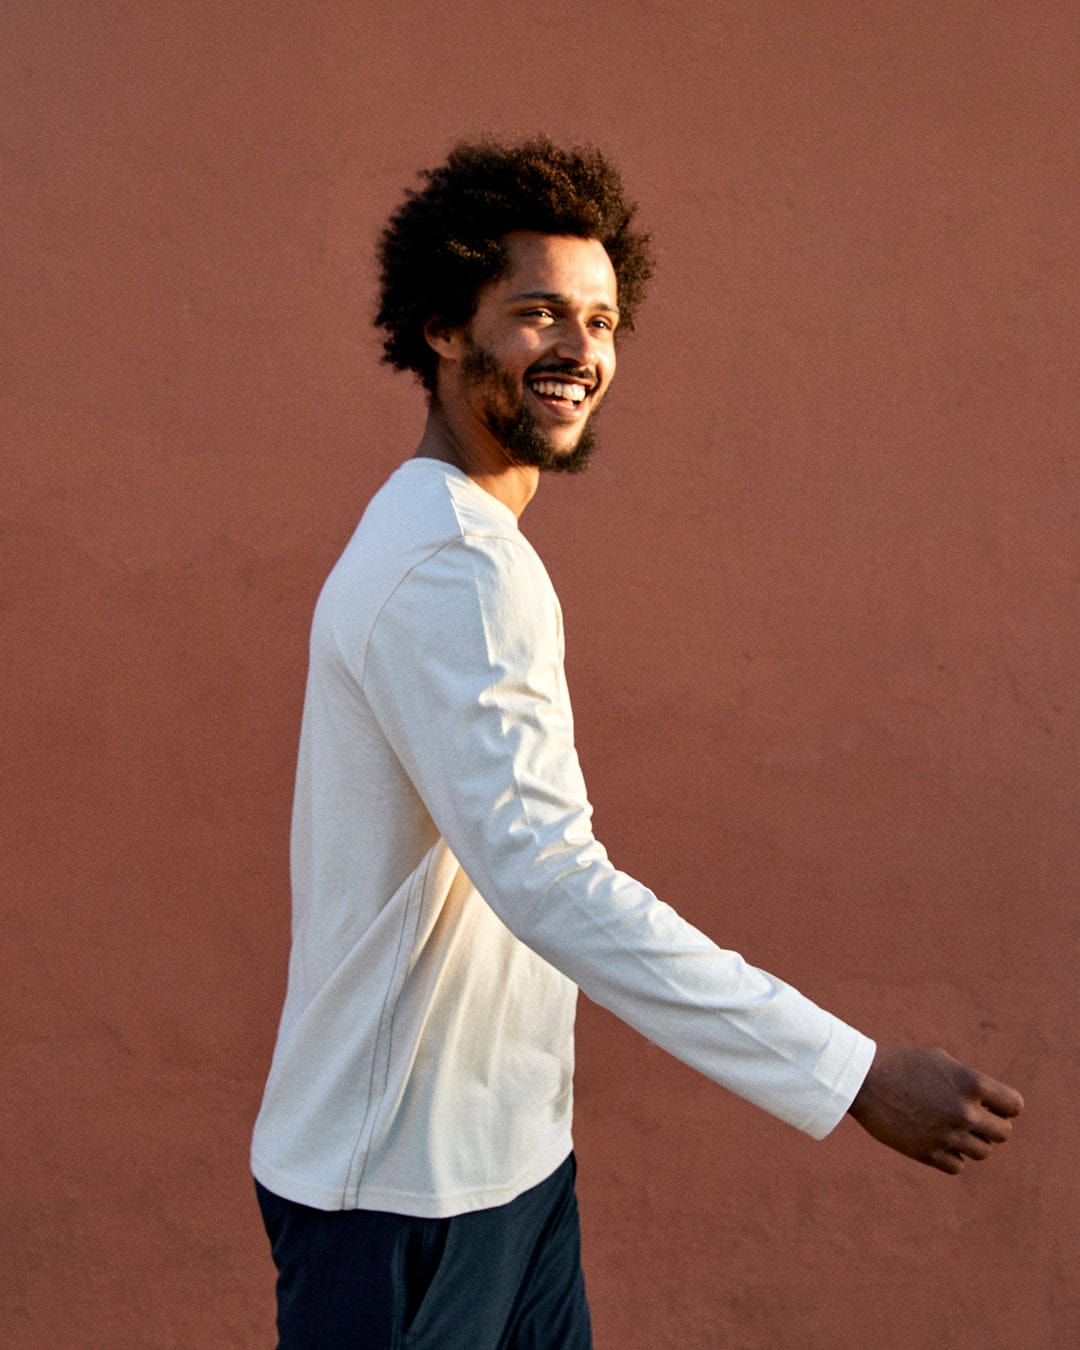 A young man with an afro smiling and walking past a pink wall, wearing a Saltrock Attendant Mens Long Sleeve T-Shirt in Cream and dark pants.